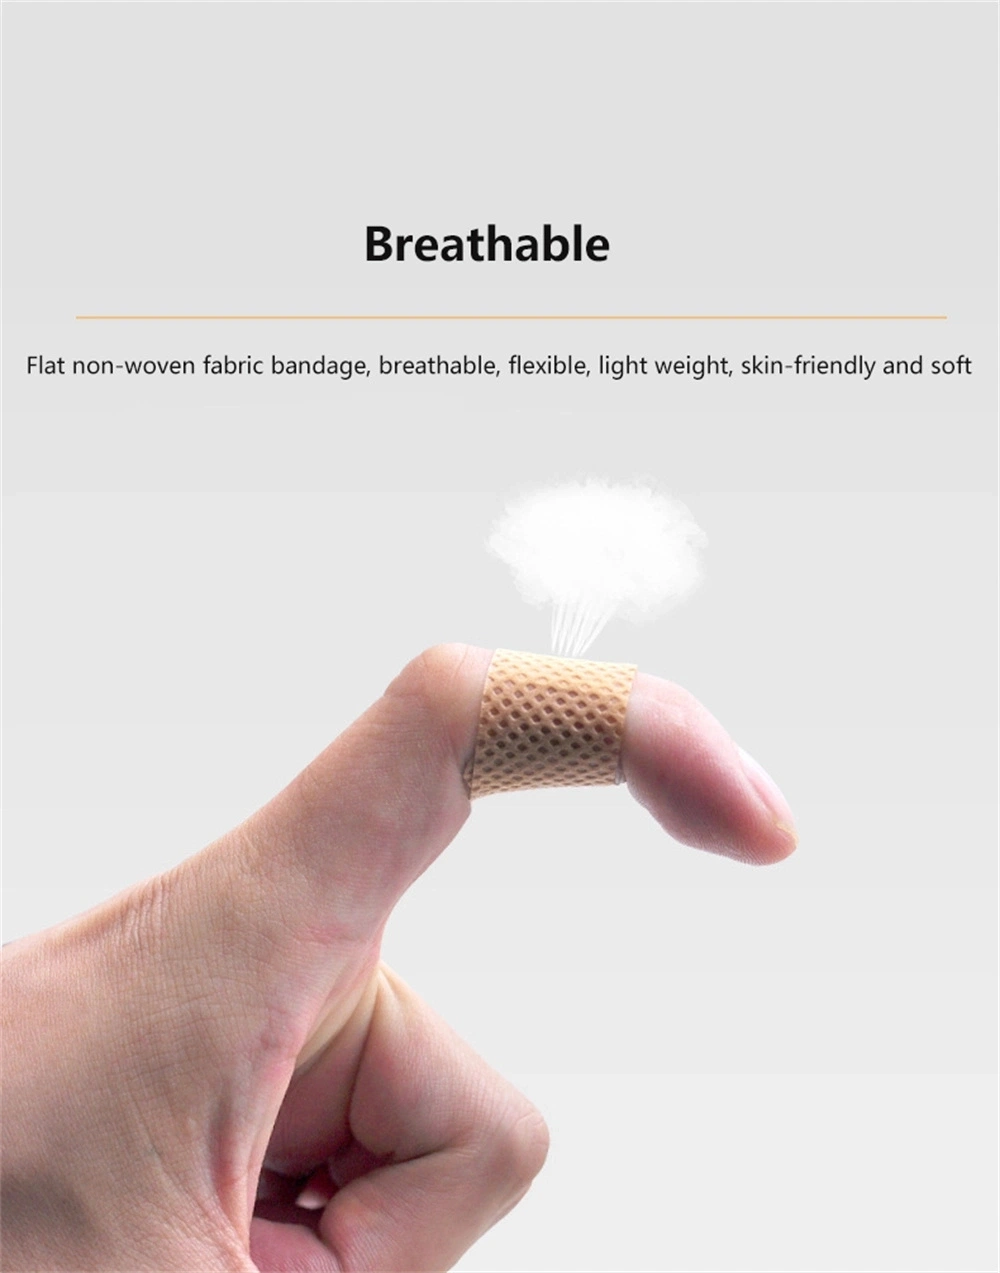 Breathable First Aid Bandage Band Aid Adhesive Wound Dressings Paste Medical Elastic Cloth Plaster